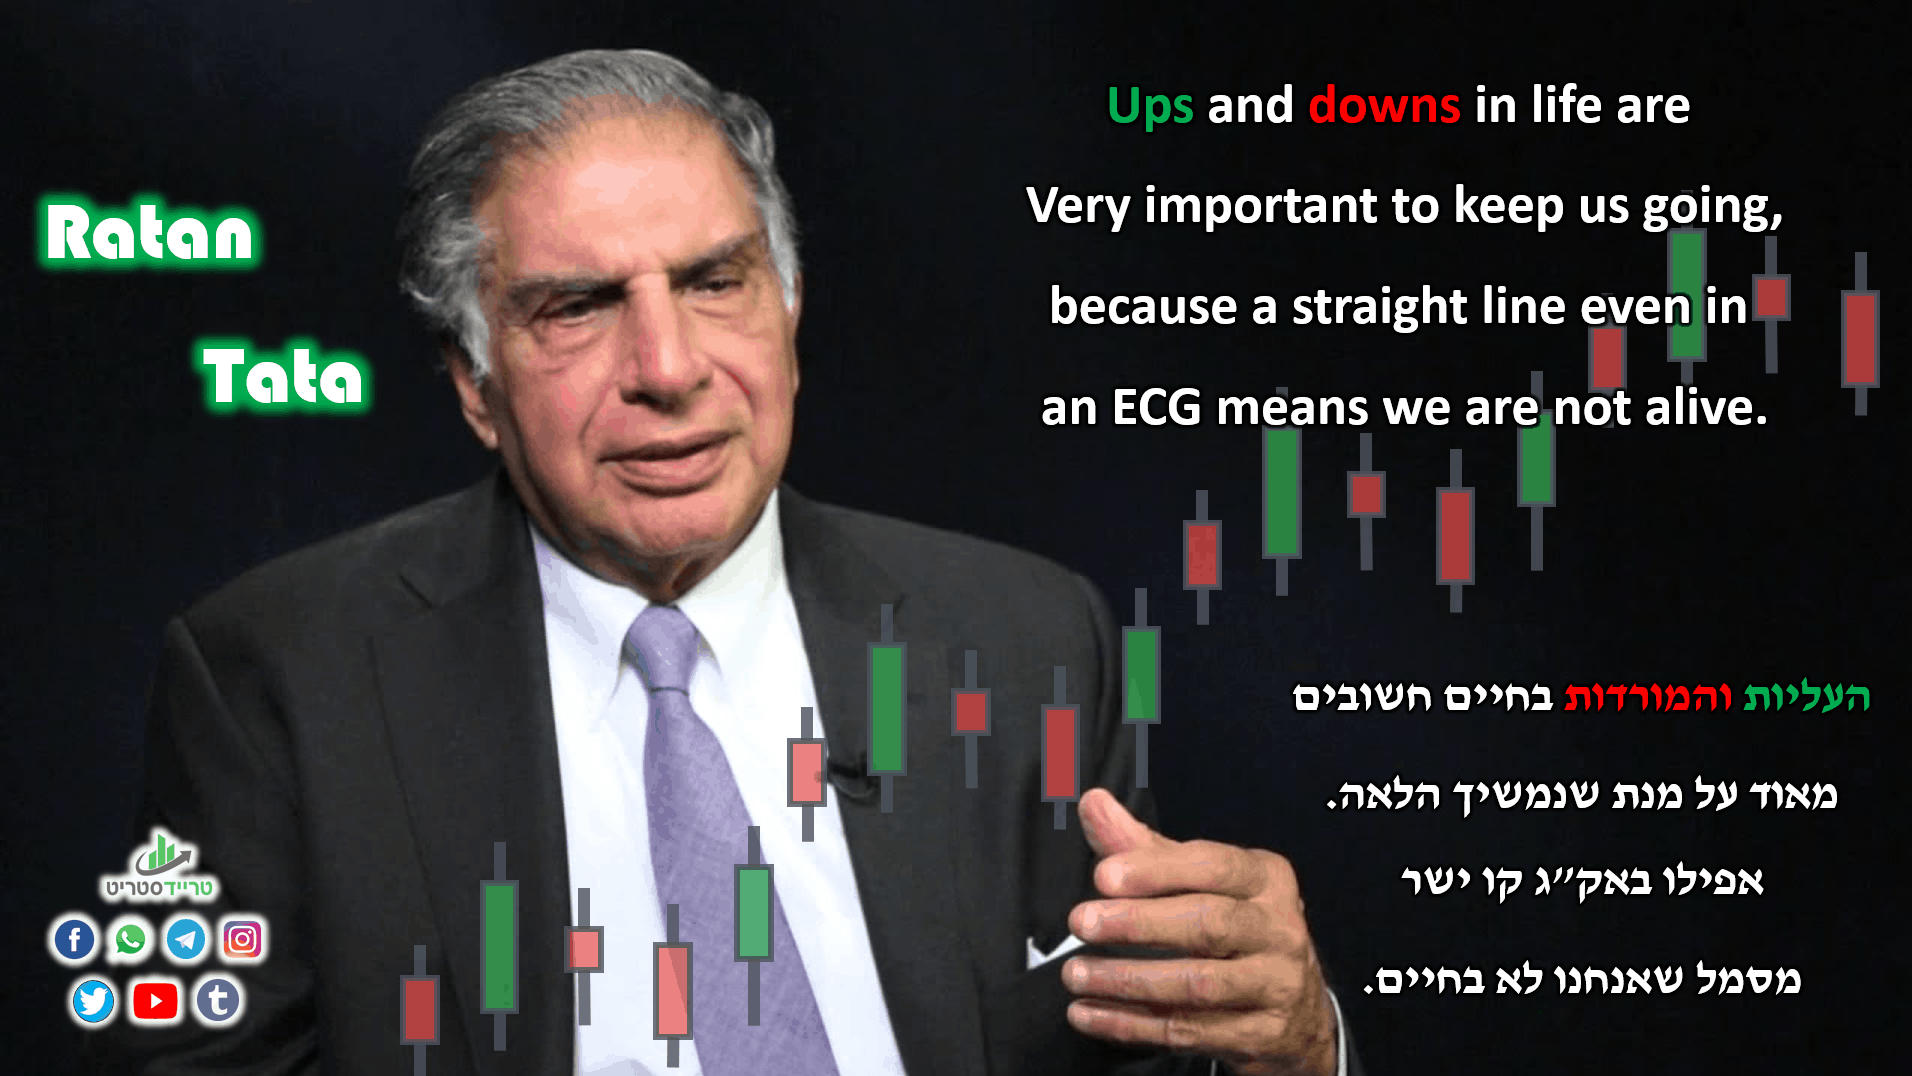 Ratan Tata - Ups and downs in life are Very important to keep